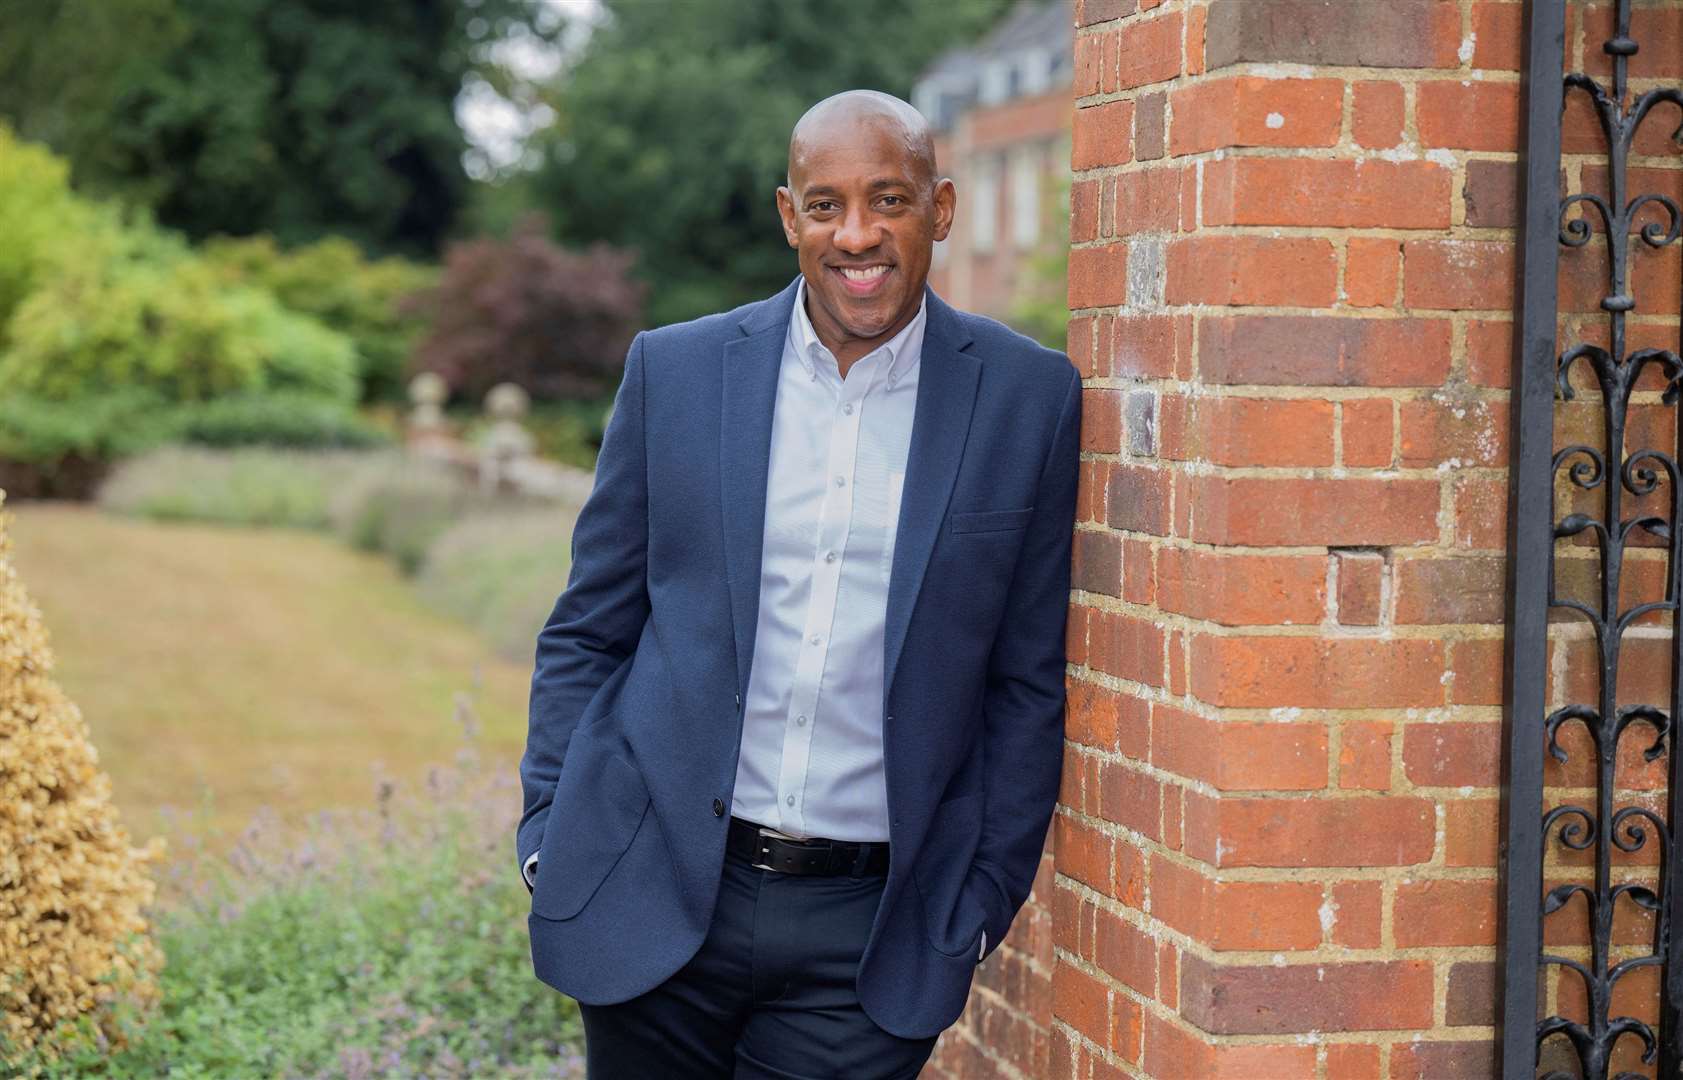 Ex-footballer and property expert Dion Dublin will be speaking at the South East Property Expo